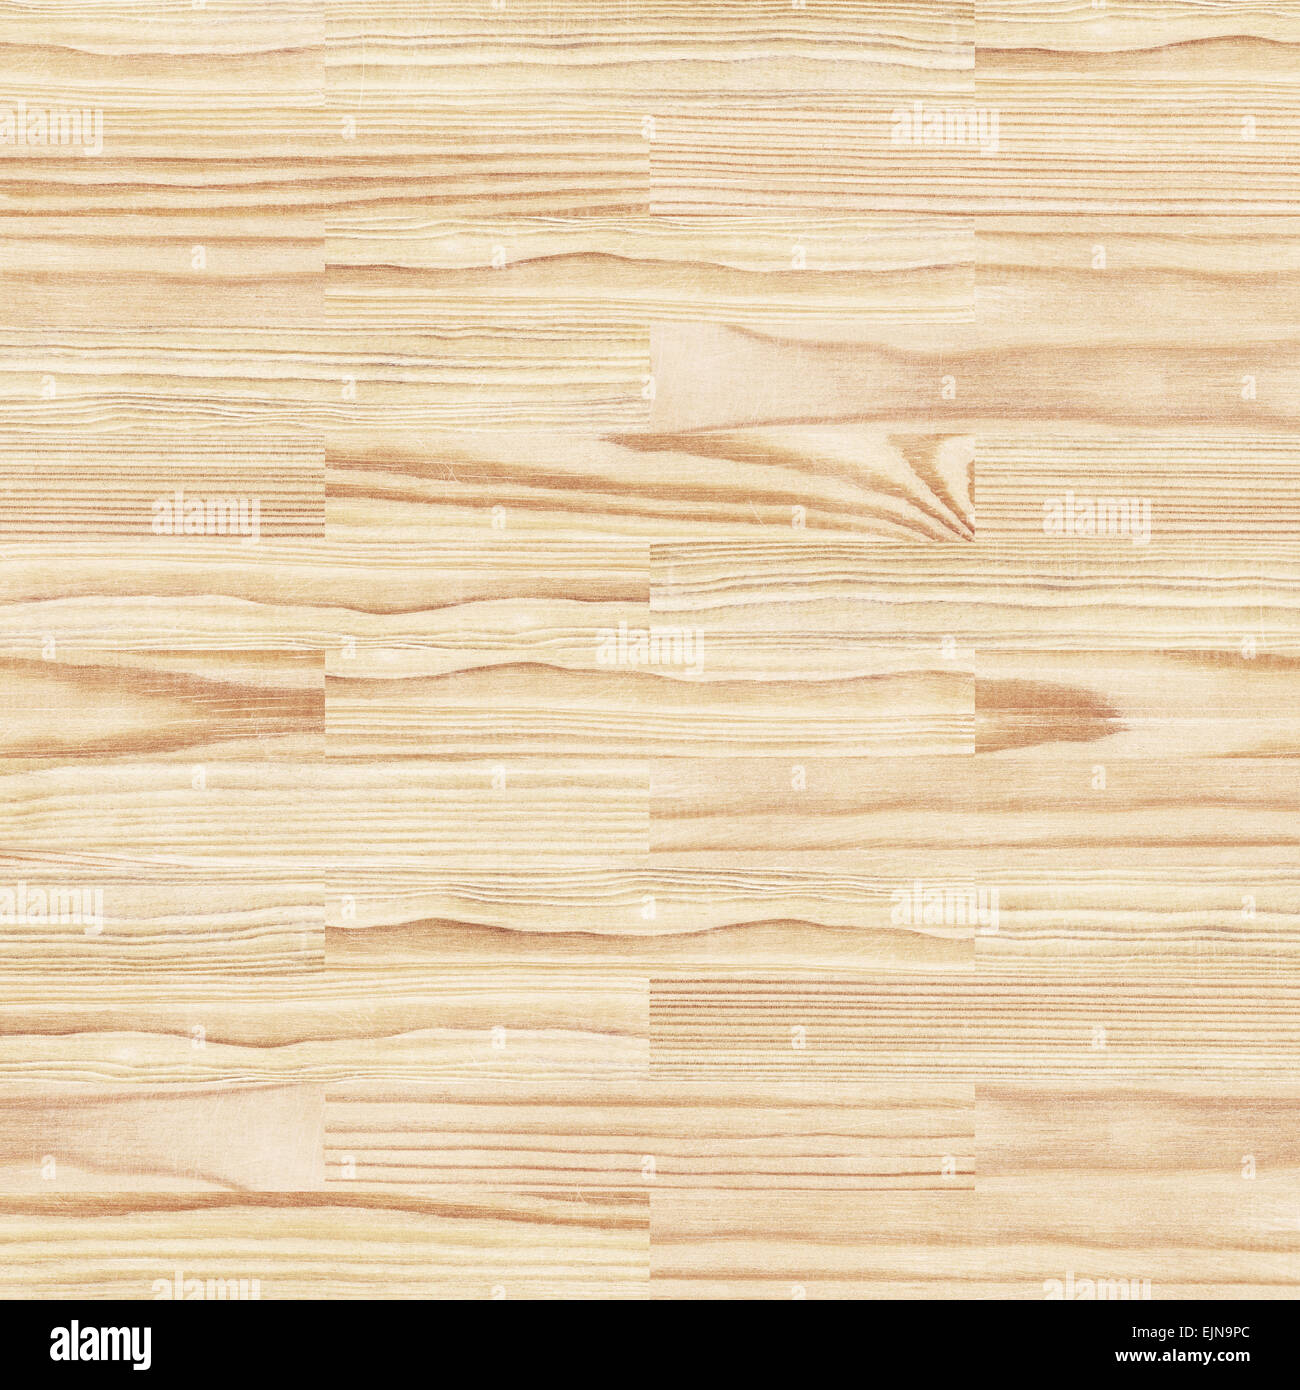 Seamless wood texture, can be used as a floor pattern Stock Photo - Alamy